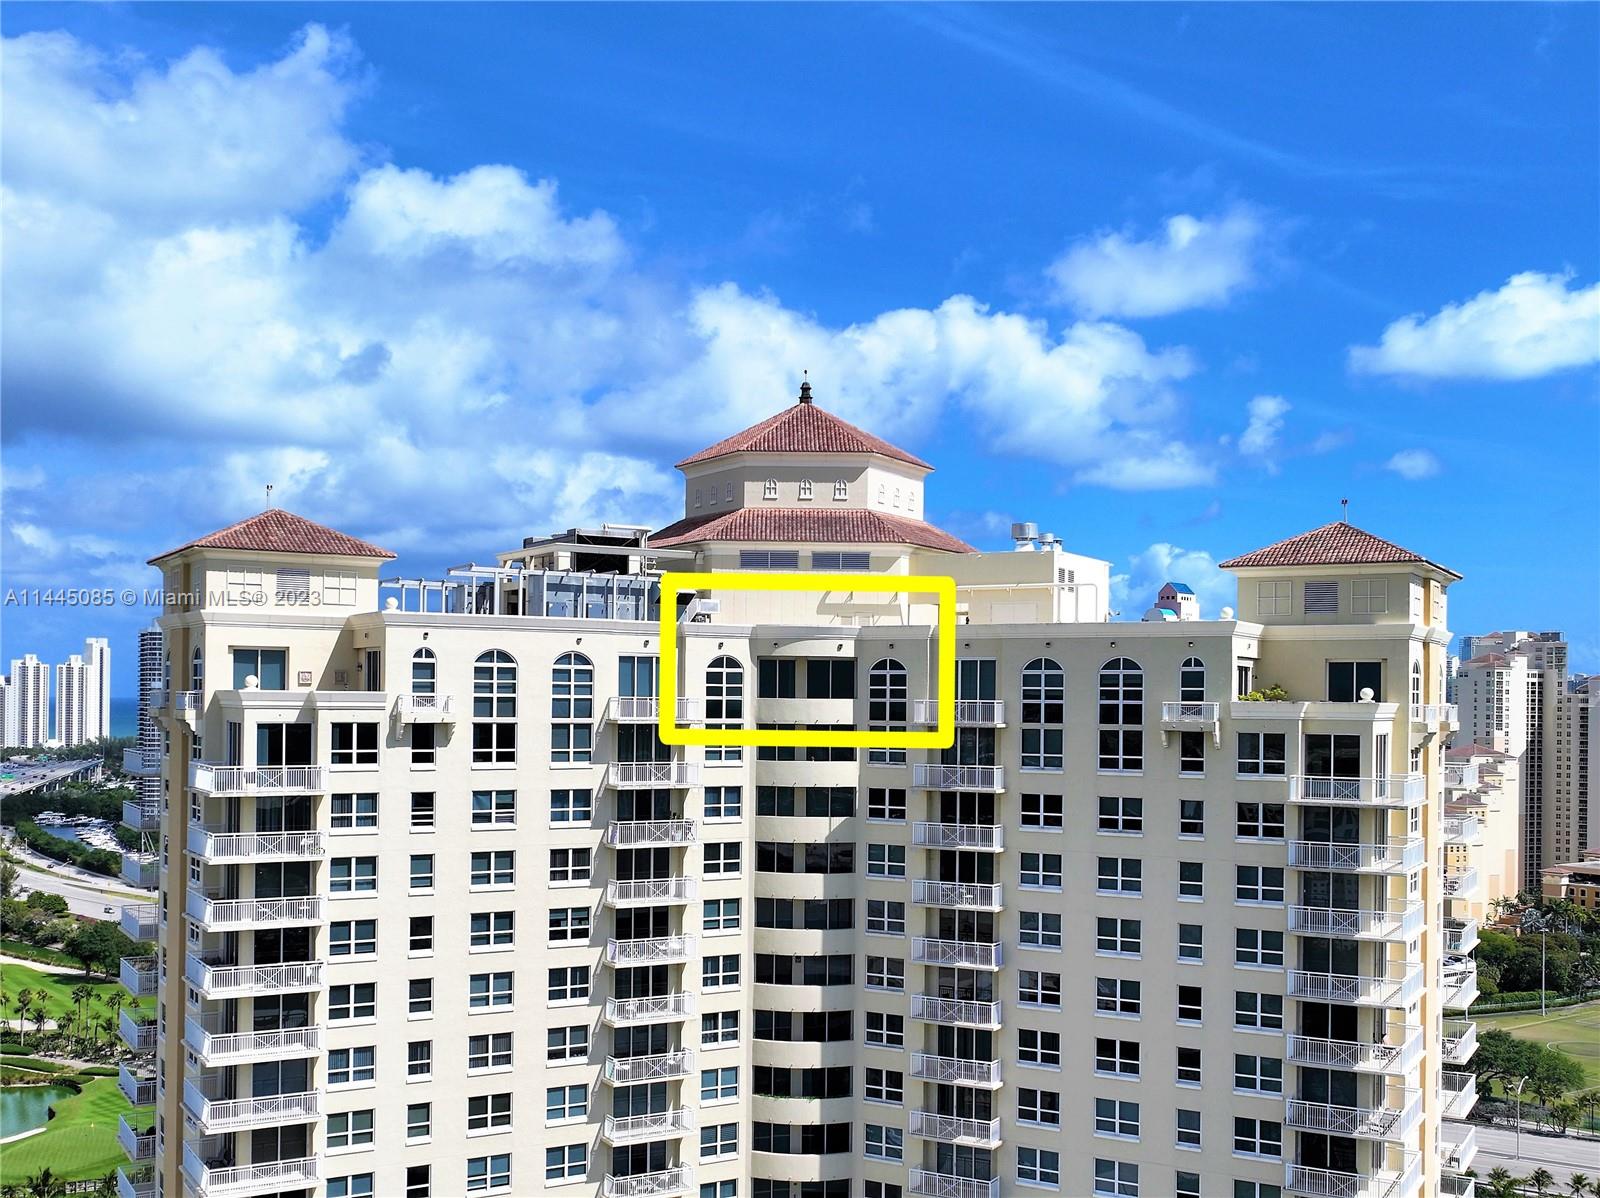 Photo 1 of Turnberry On The Green Co Apt TS-07 in Aventura - MLS A11445085